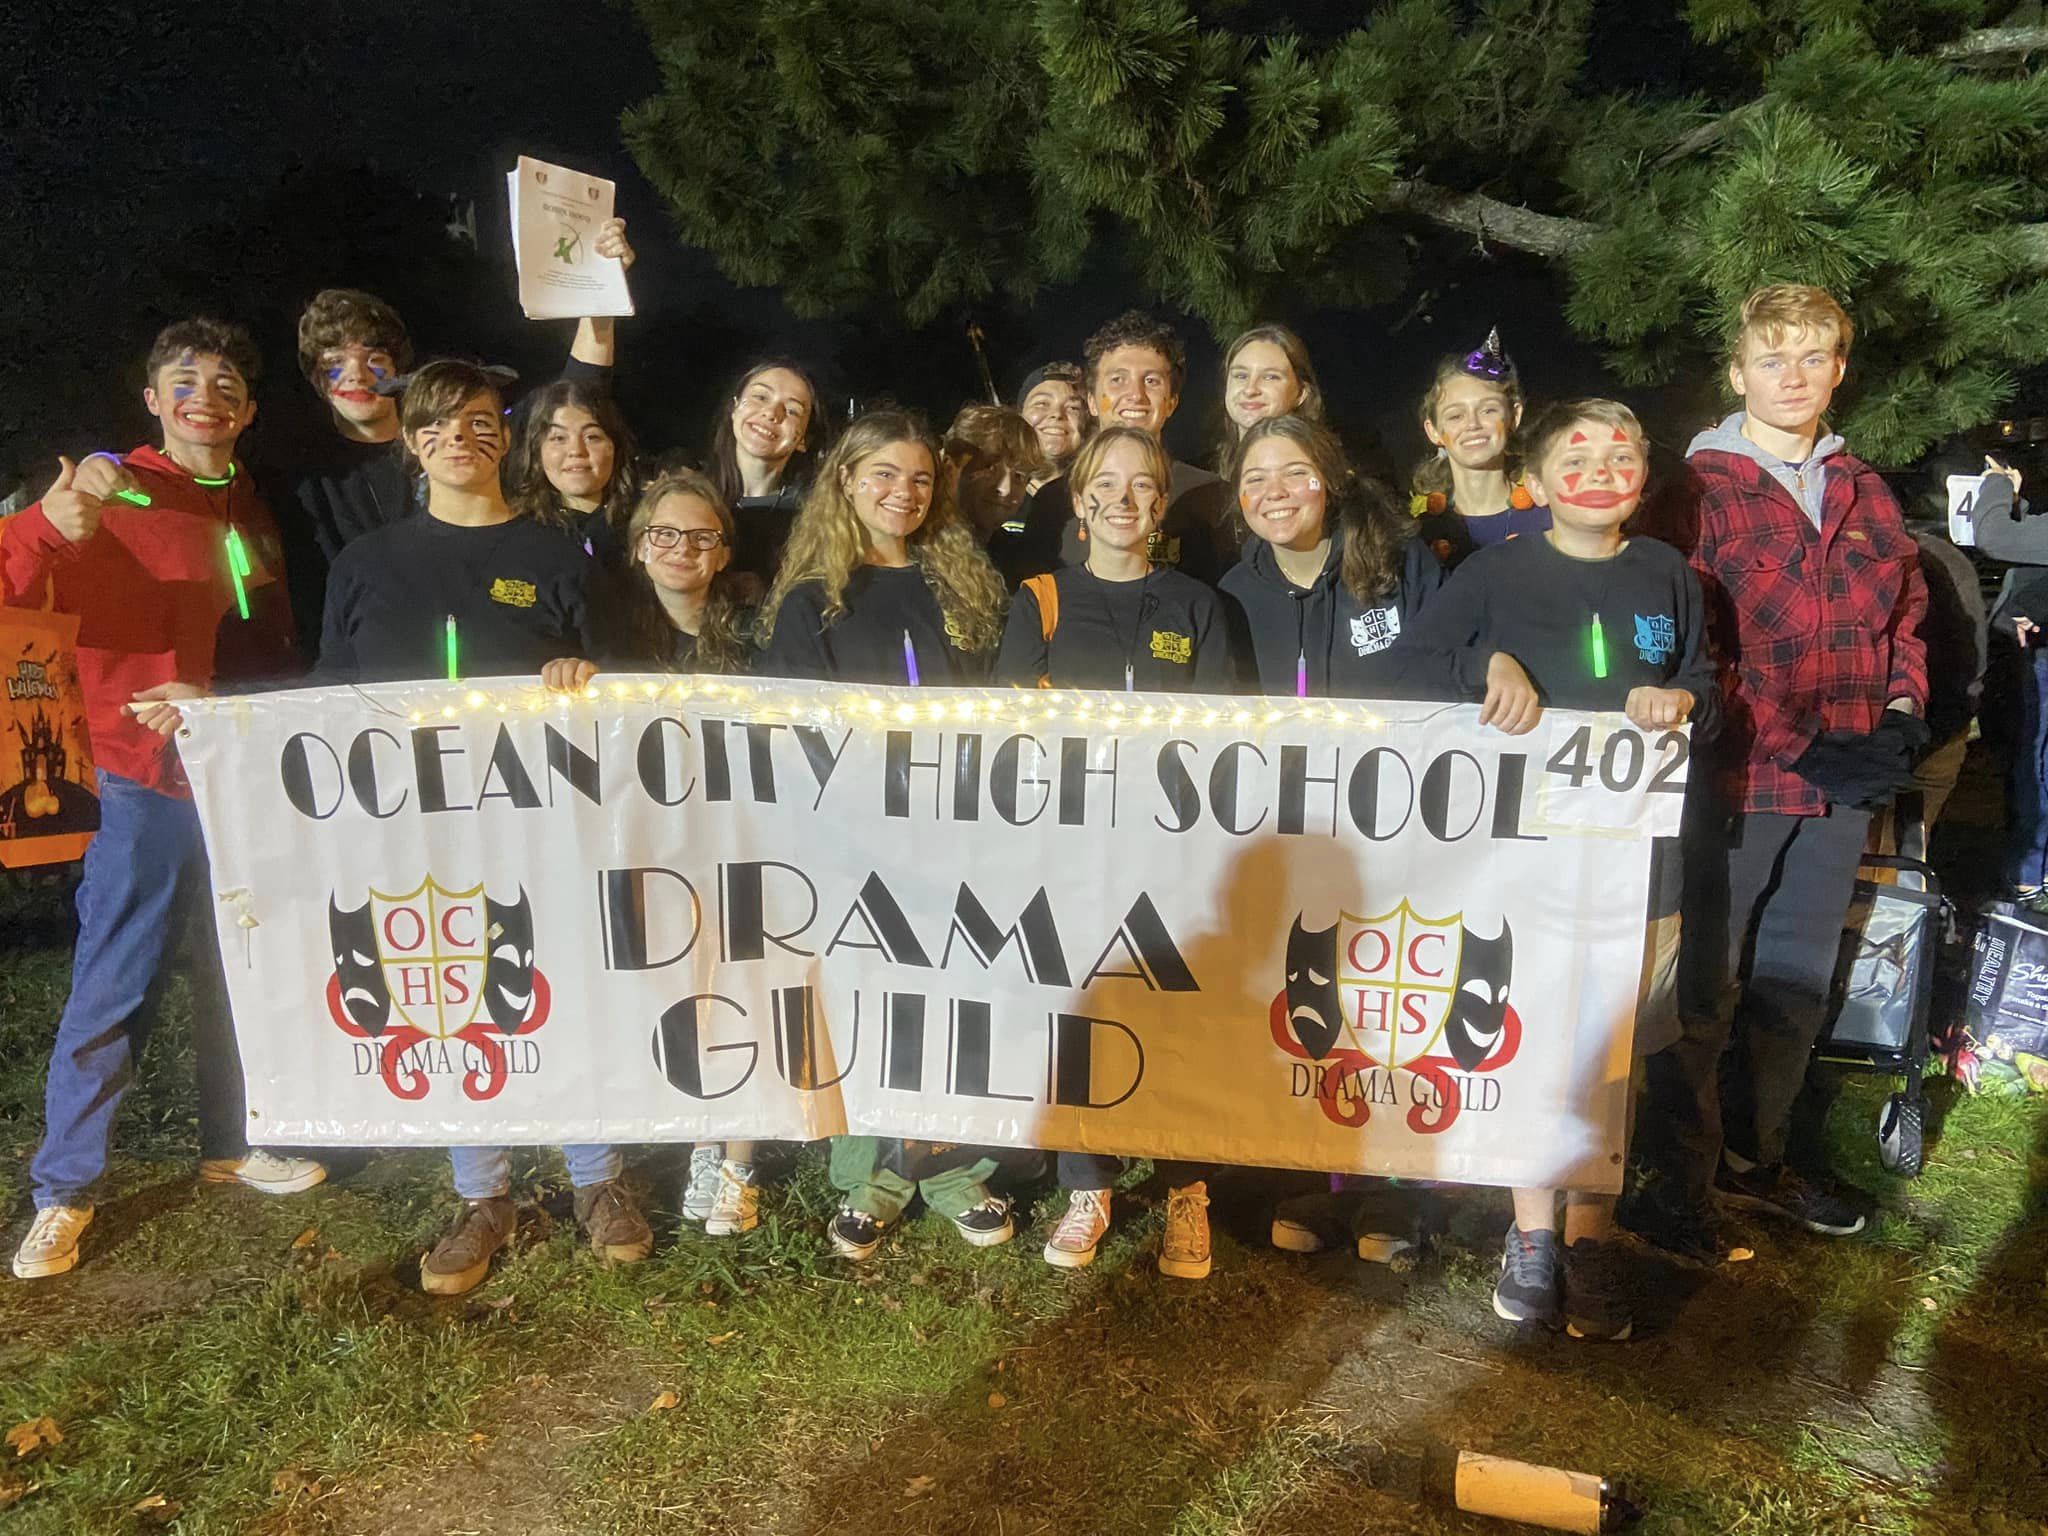 OCHS Students in the Drama Guild posing for a photo with a custom banner